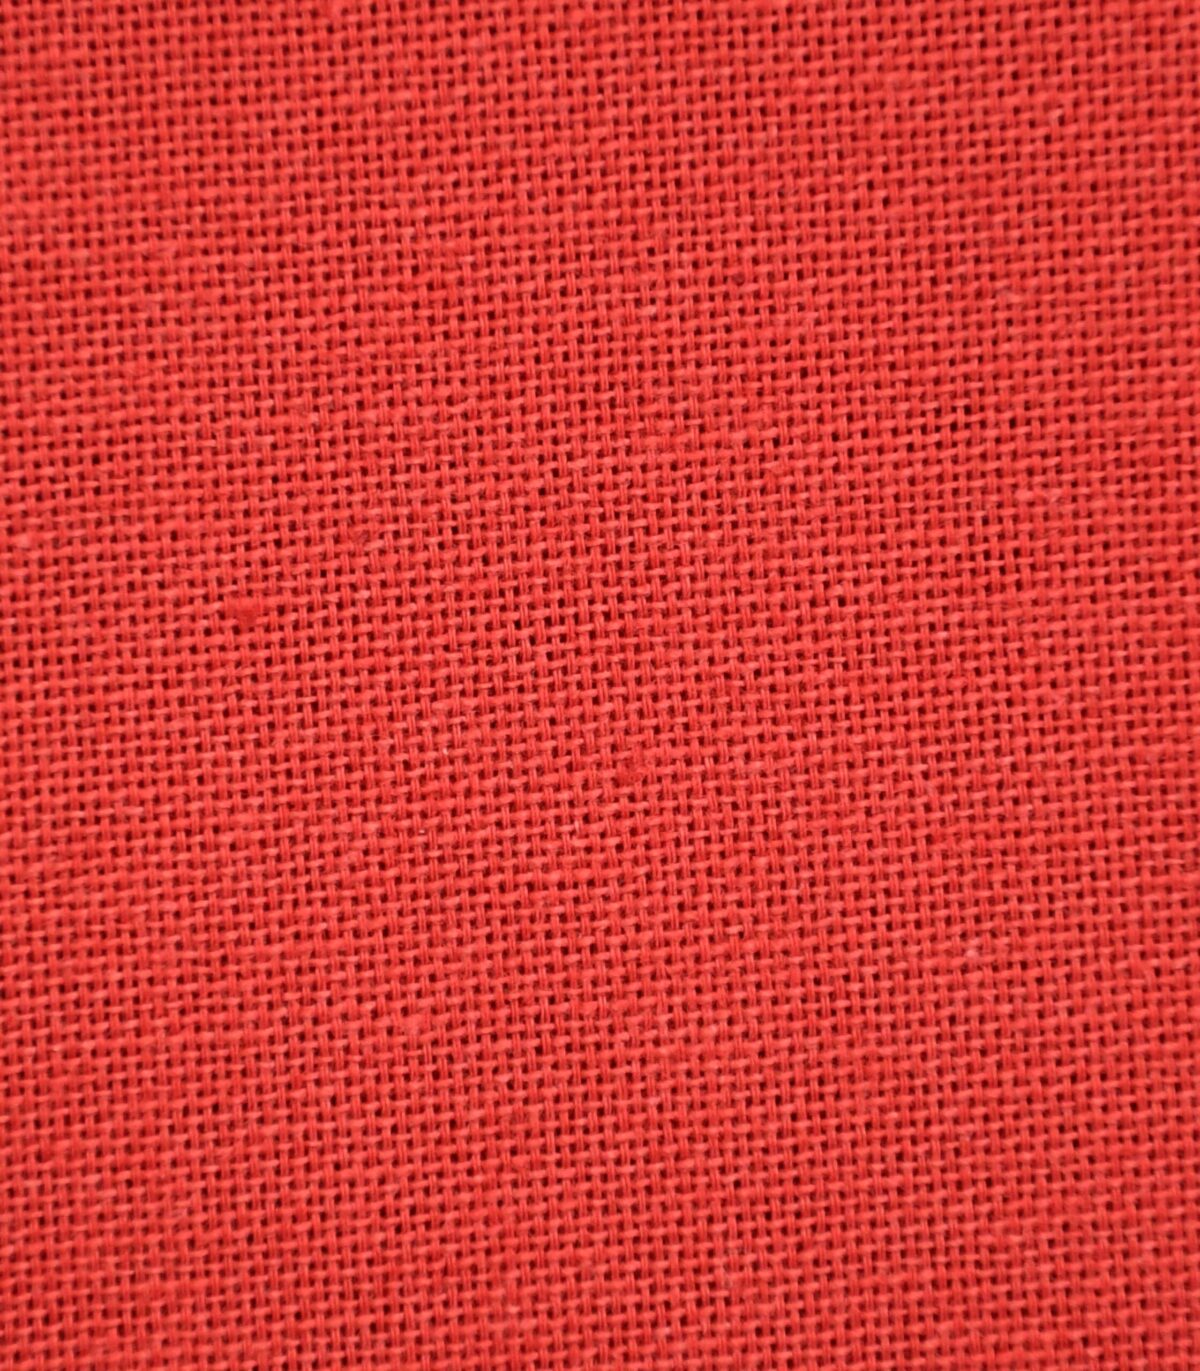 Cotton Light Red Dyed Oxford Fabric